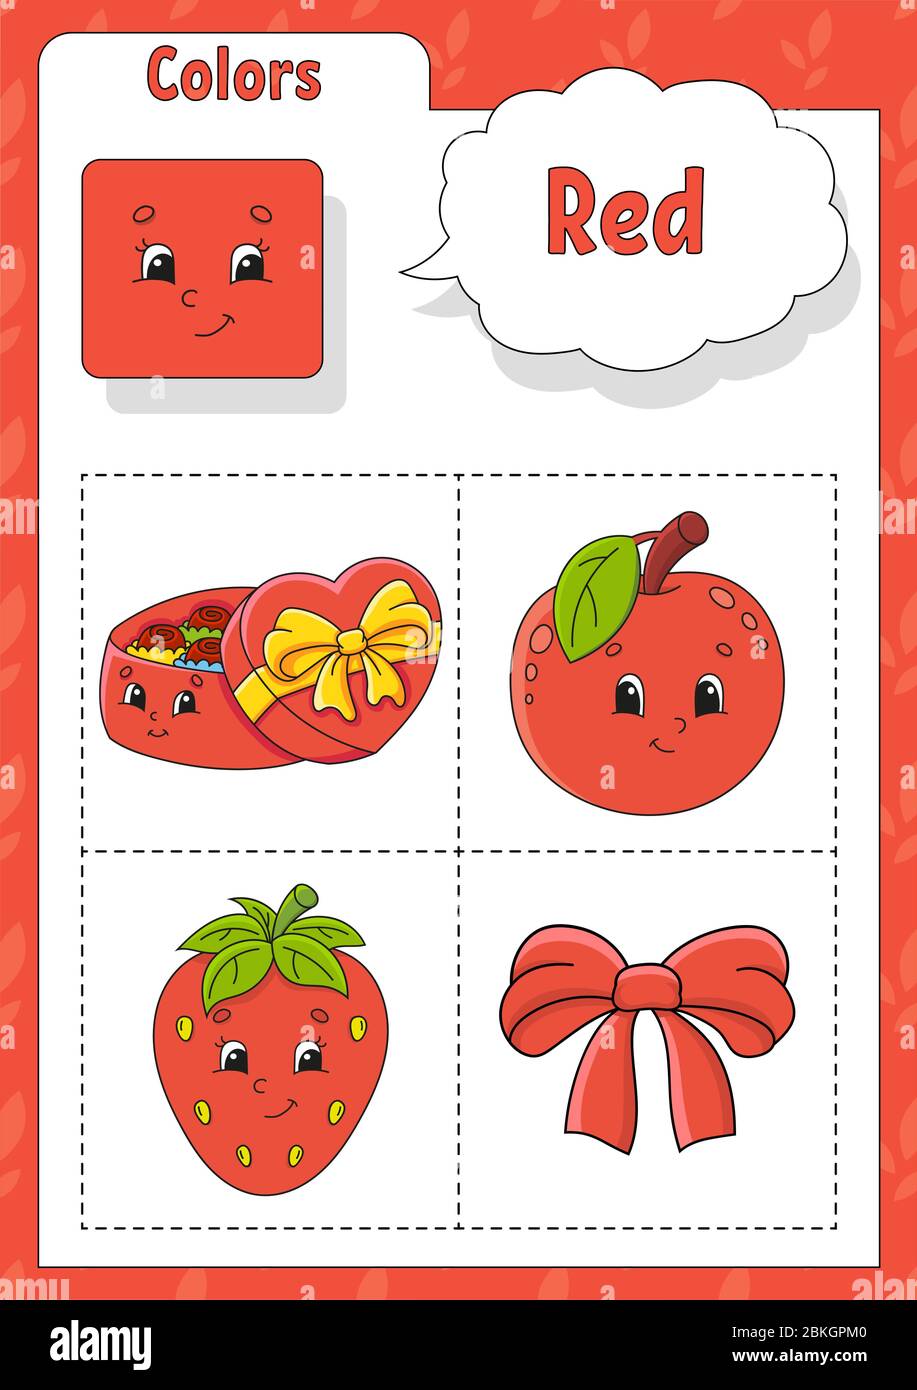 learning colors red color flashcard for kids cute cartoon characters picture set for preschoolers education worksheet vector illustration stock vector image art alamy